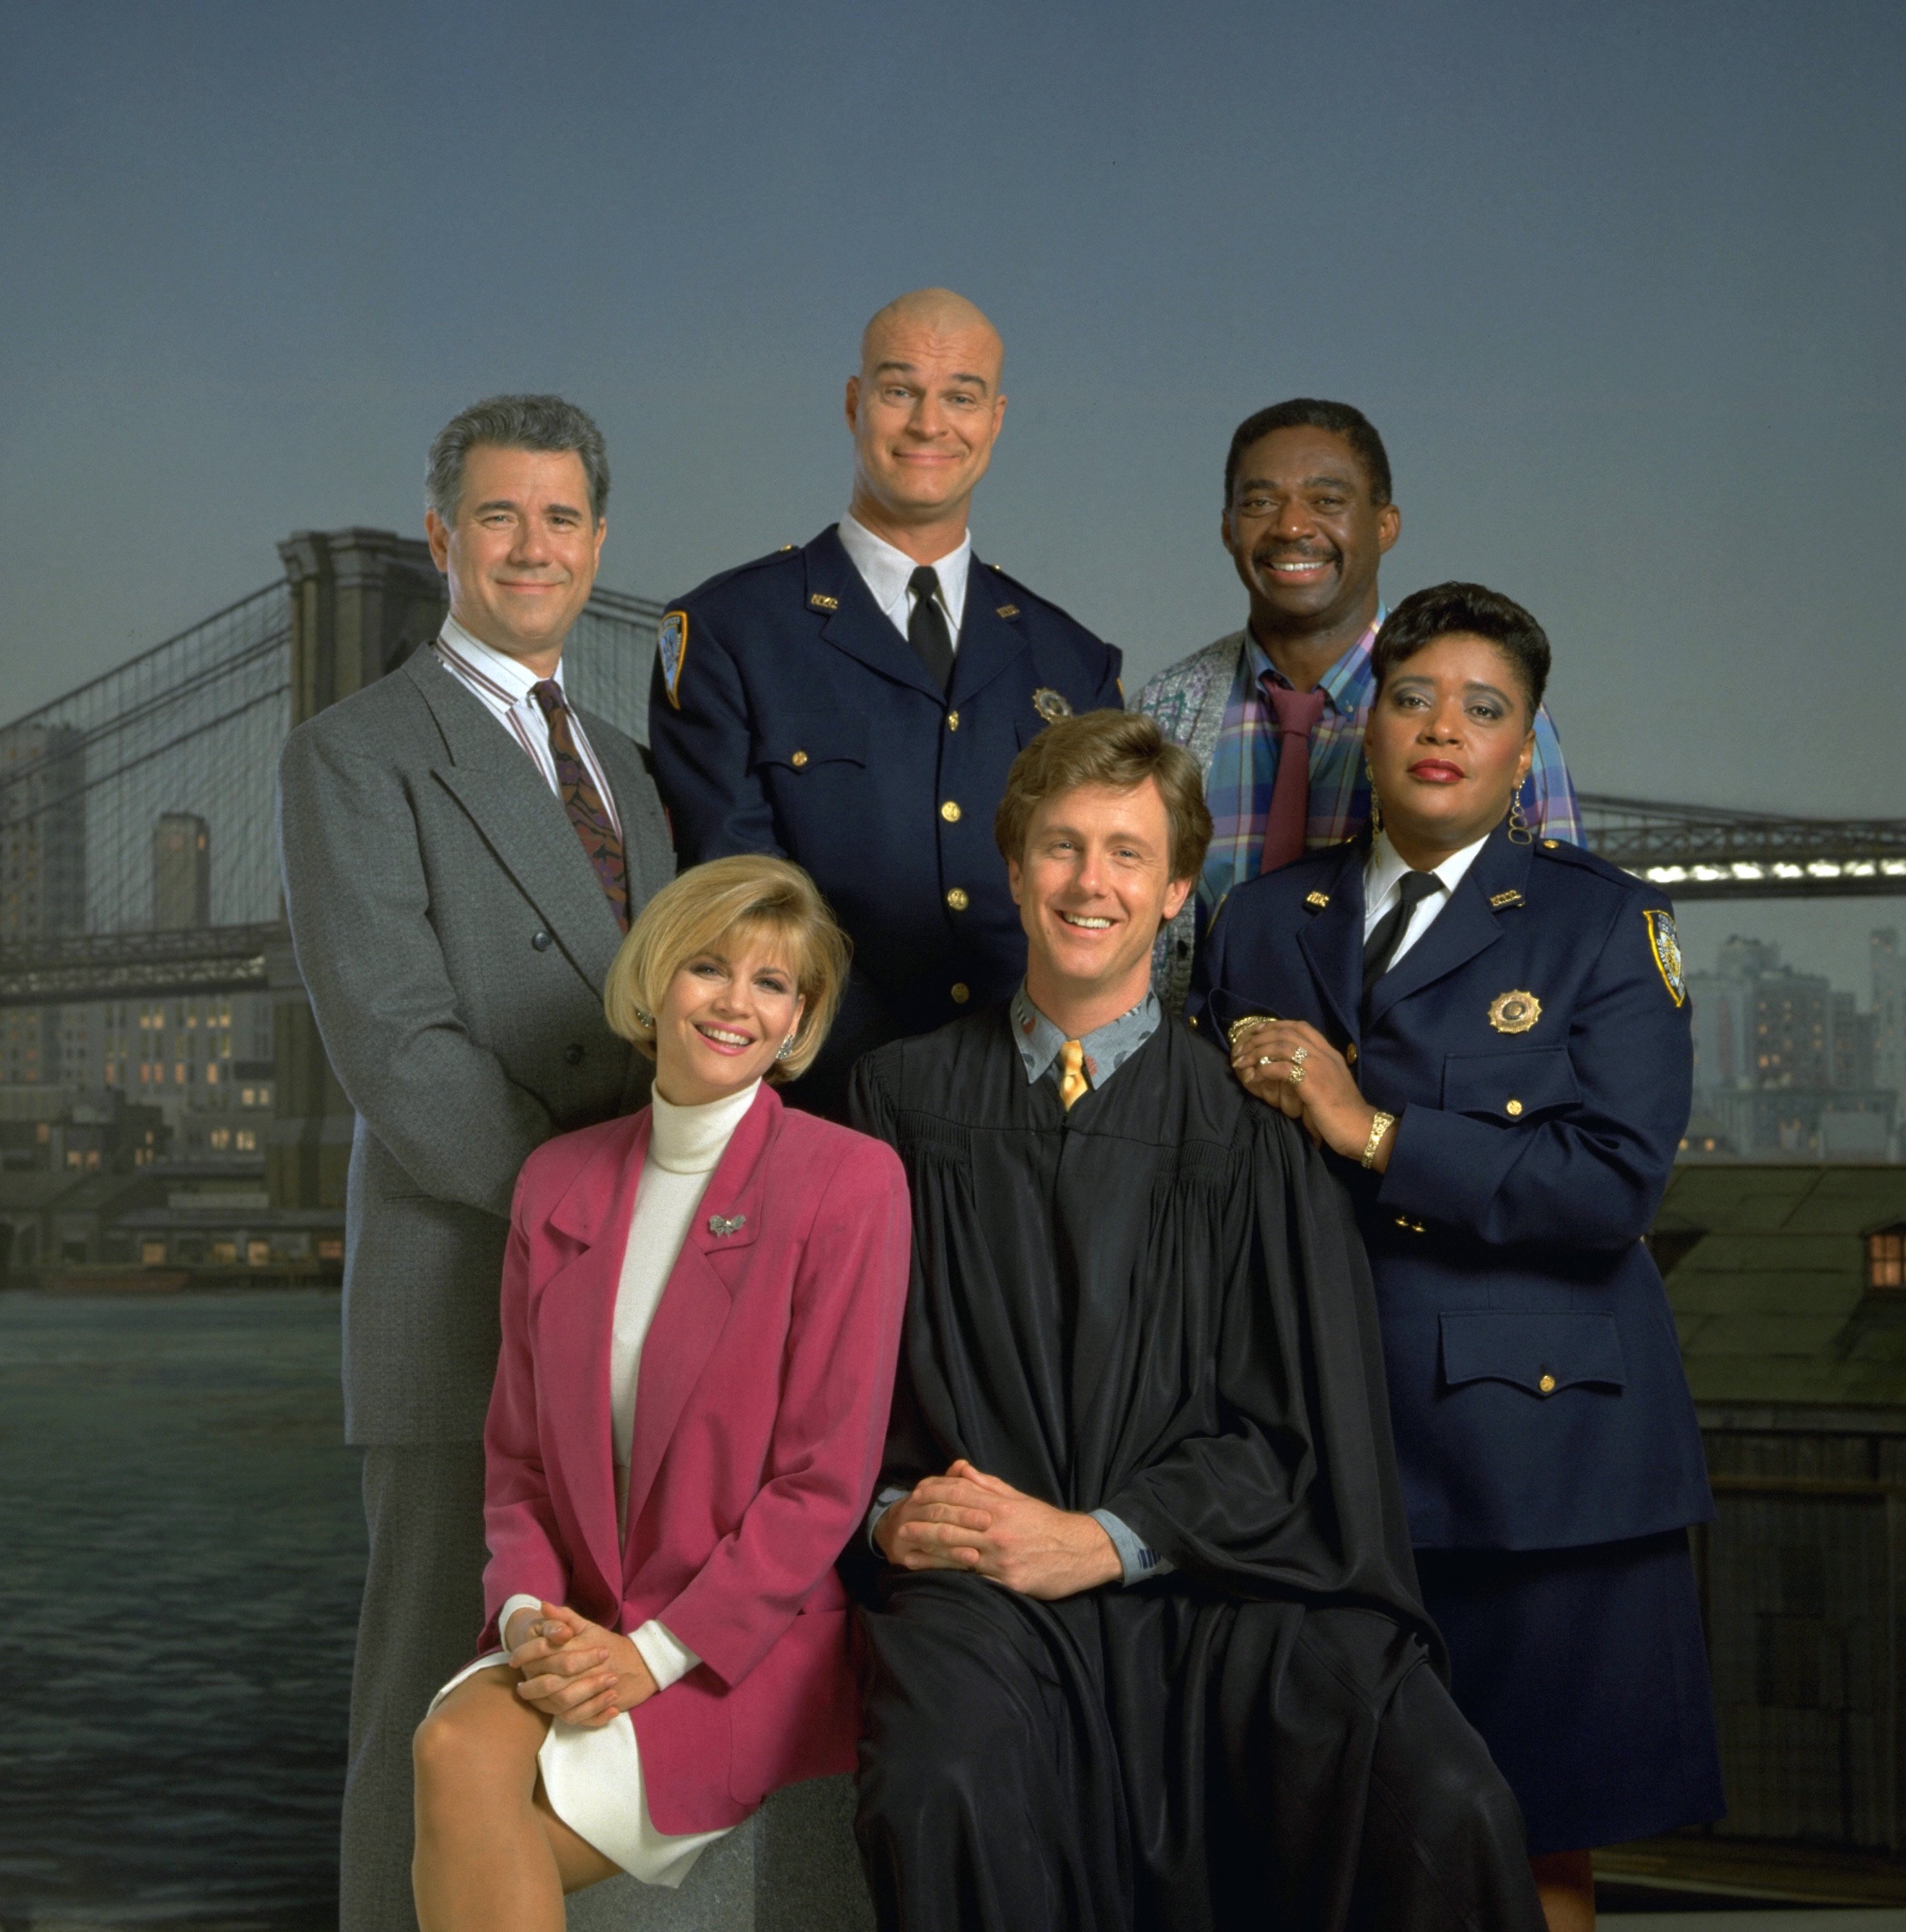 (l-r) John Larroquette as Dan Fielding, Markie Post as Christine Sullivan, Richard Moll as Nostradamus 'Bull' Shannon, Harry Anderson as Judge Harry T. Stone, Charles Robinson as Mac Robinson, Marsha Warfield as Rosalind 'Roz' Russell on "Night Court" | Source: Getty Images